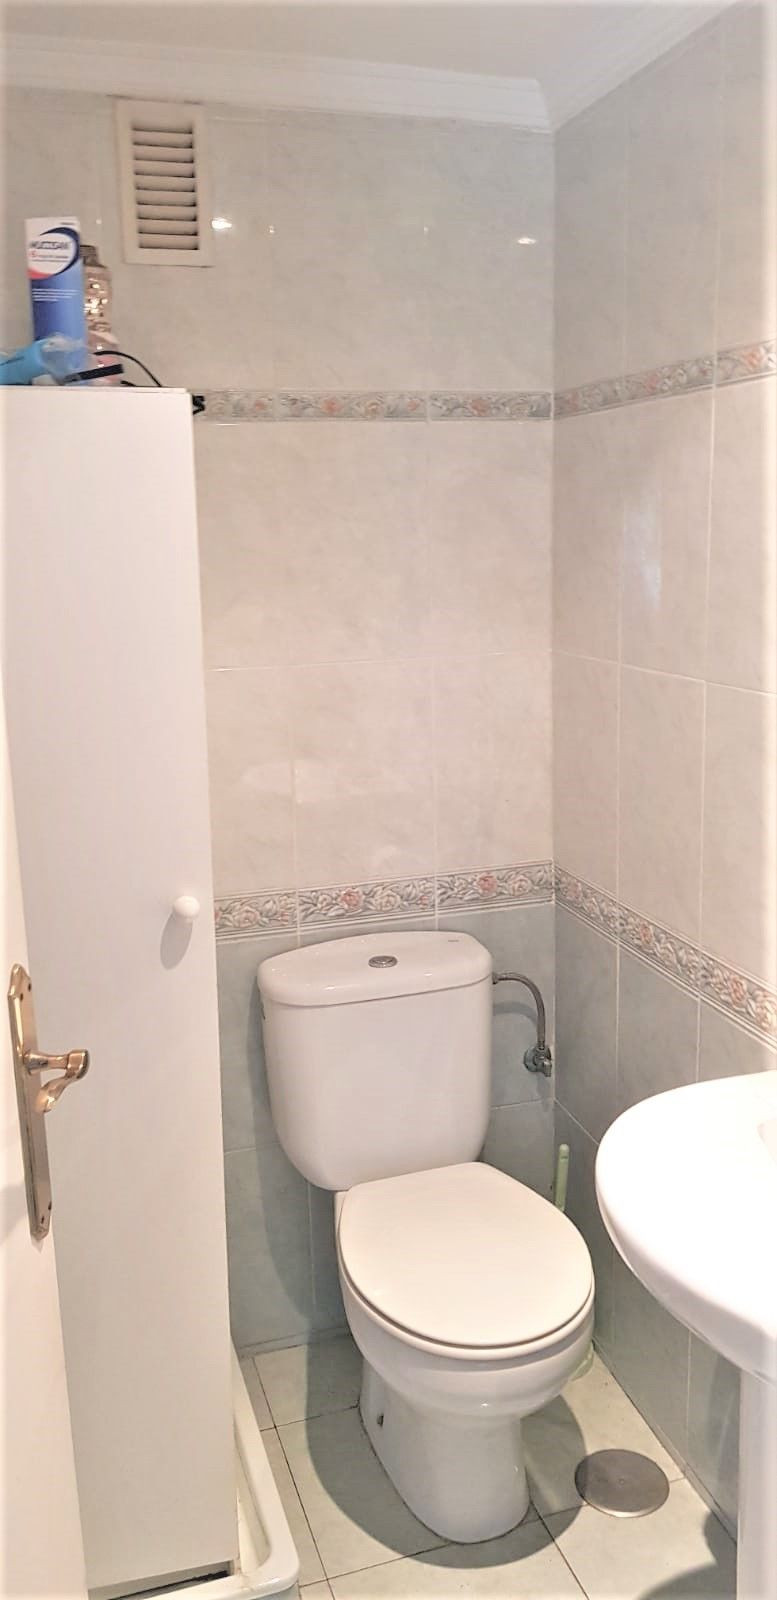 3 bedroom Apartment For Sale in Los Boliches, Málaga - thumb 36